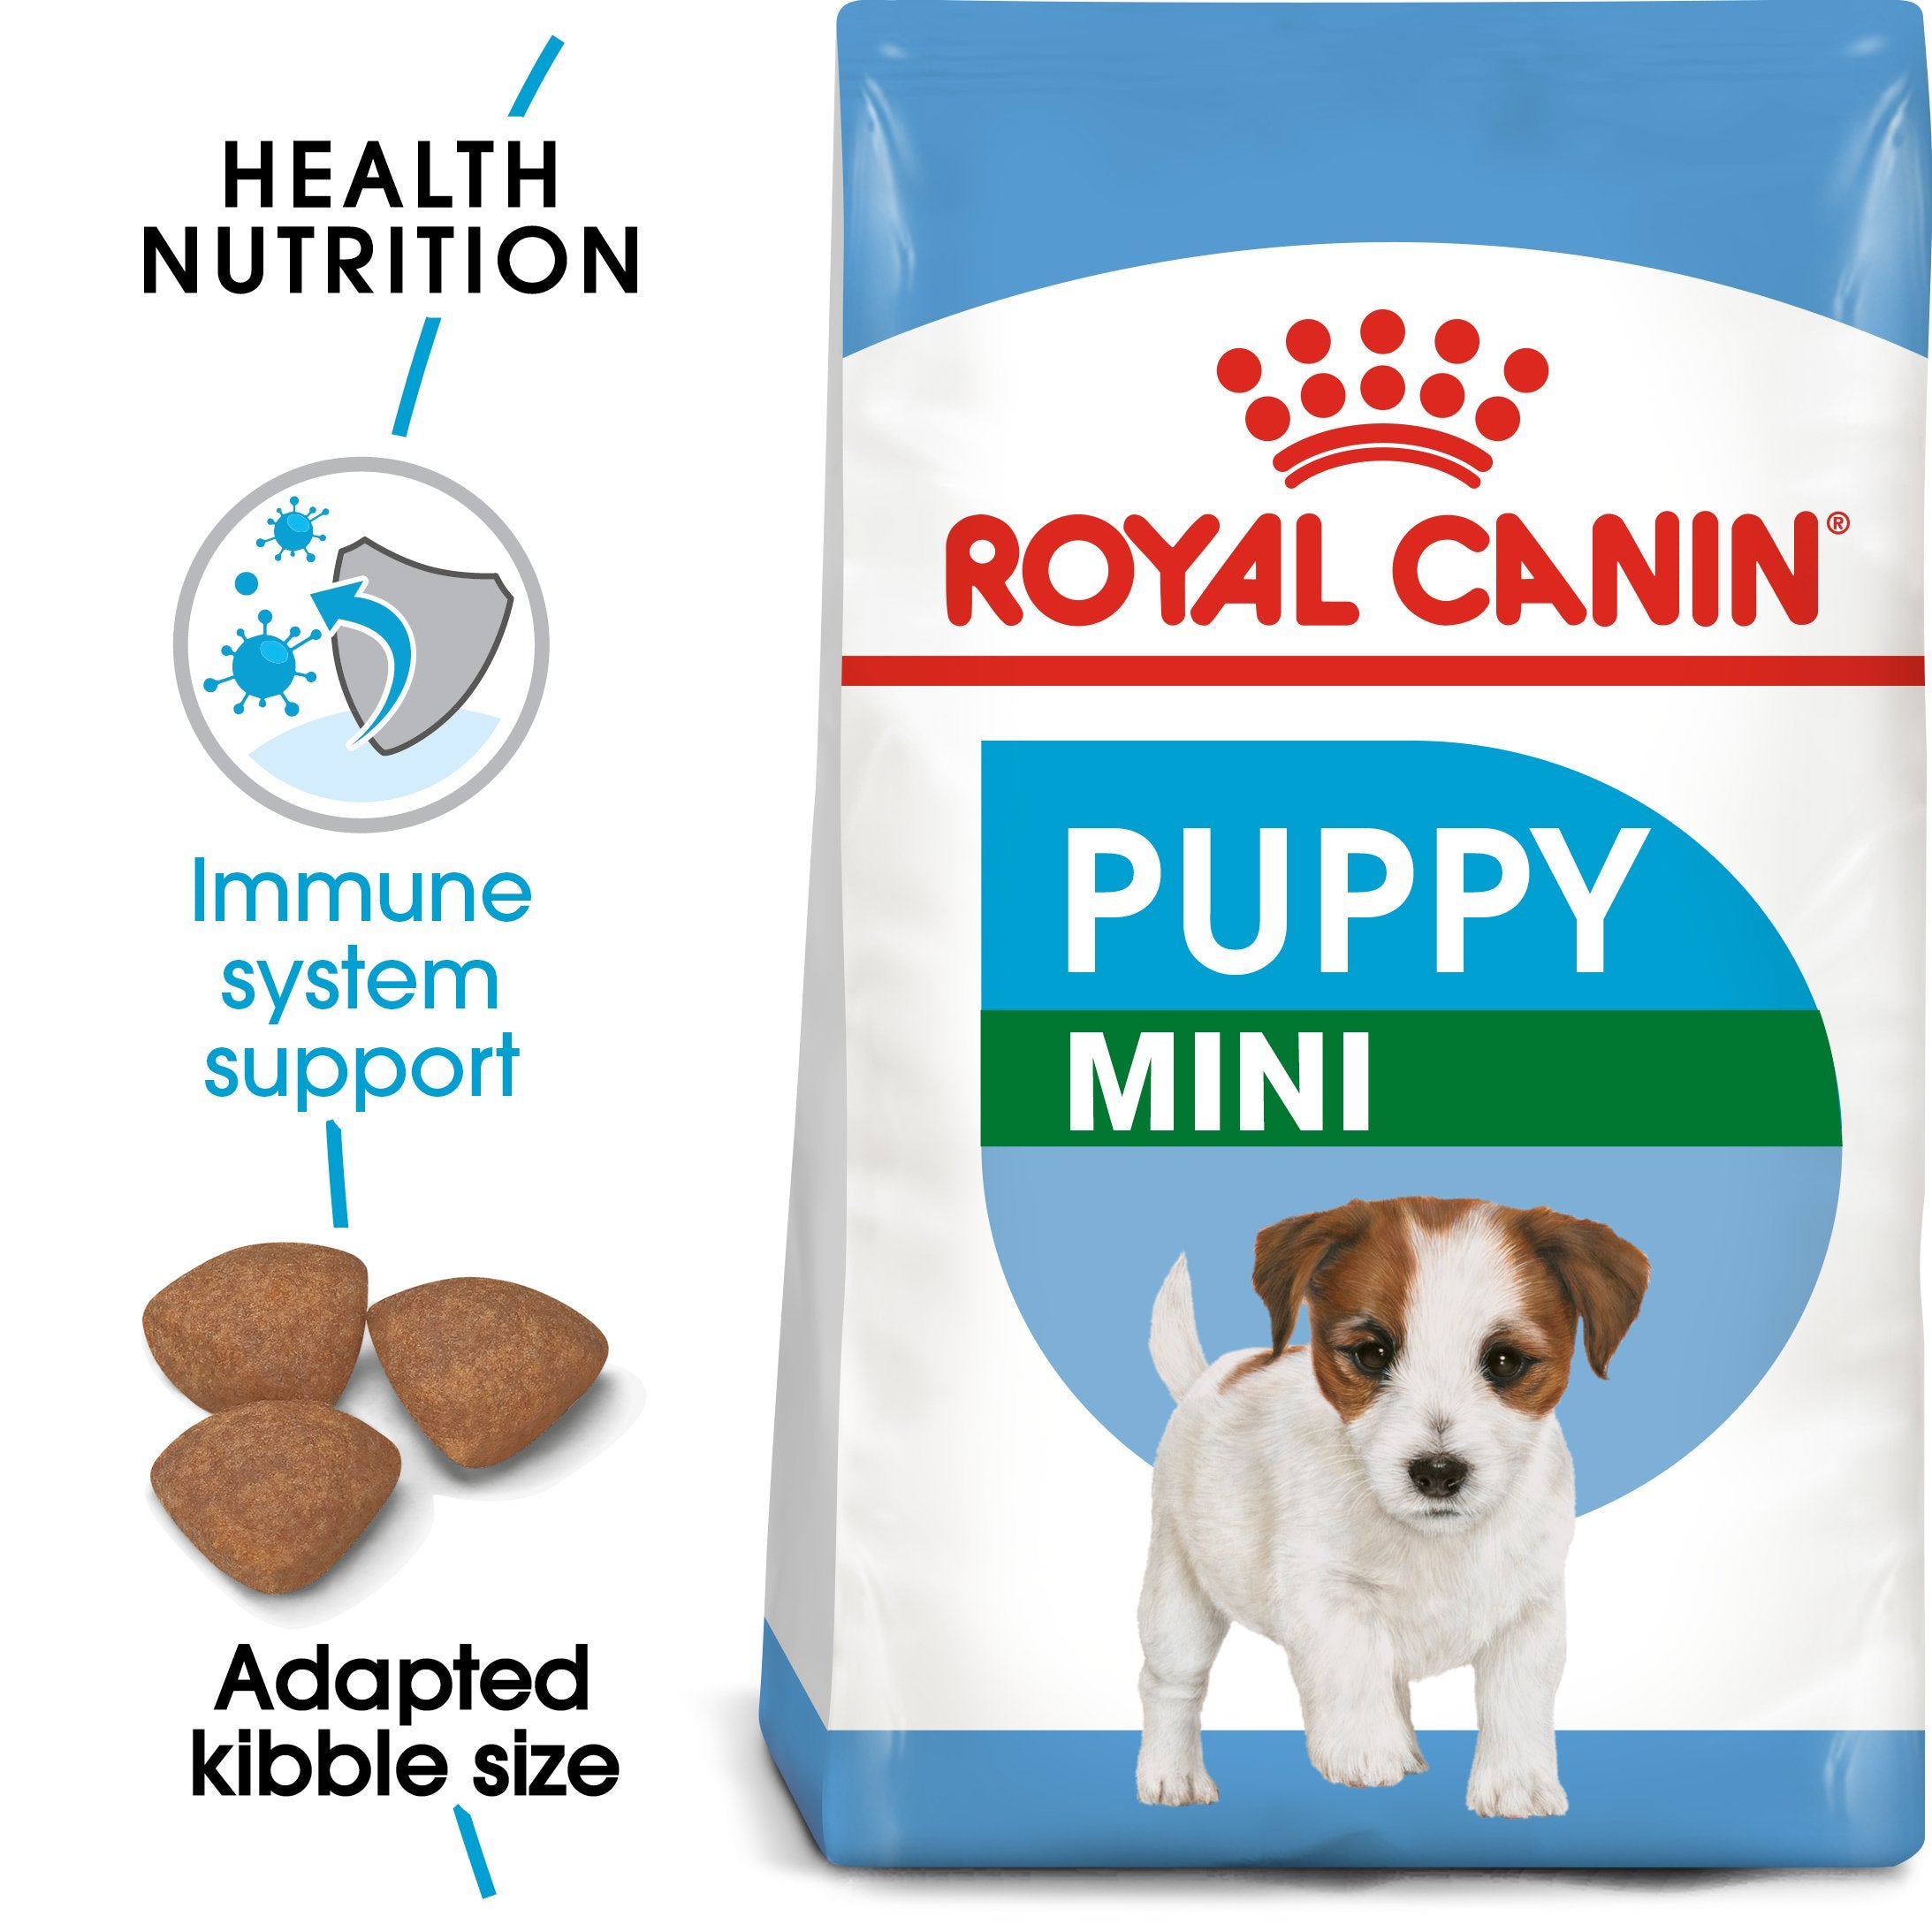 Royal Canin Mini Puppy (4KG) - Dry food for small dogs - Adult weight up to 10 KG From 2 to 10 months old